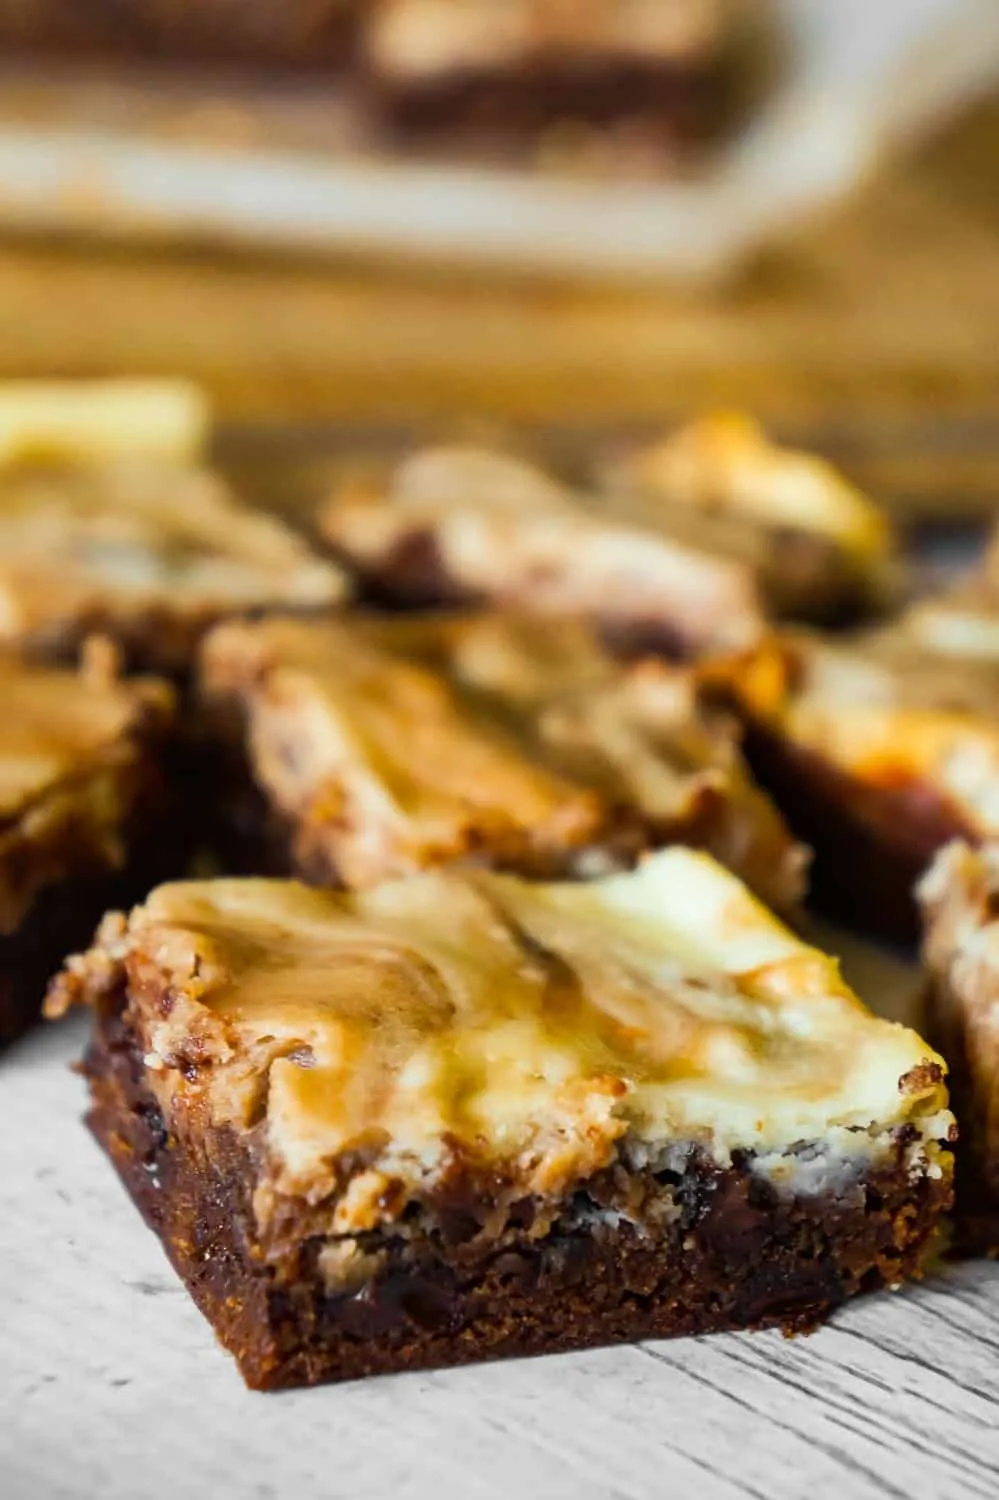 Brownies with Cream Cheese are a decadent chocolate dessert loaded with chocolate chips and a rich cheesecake swirl.